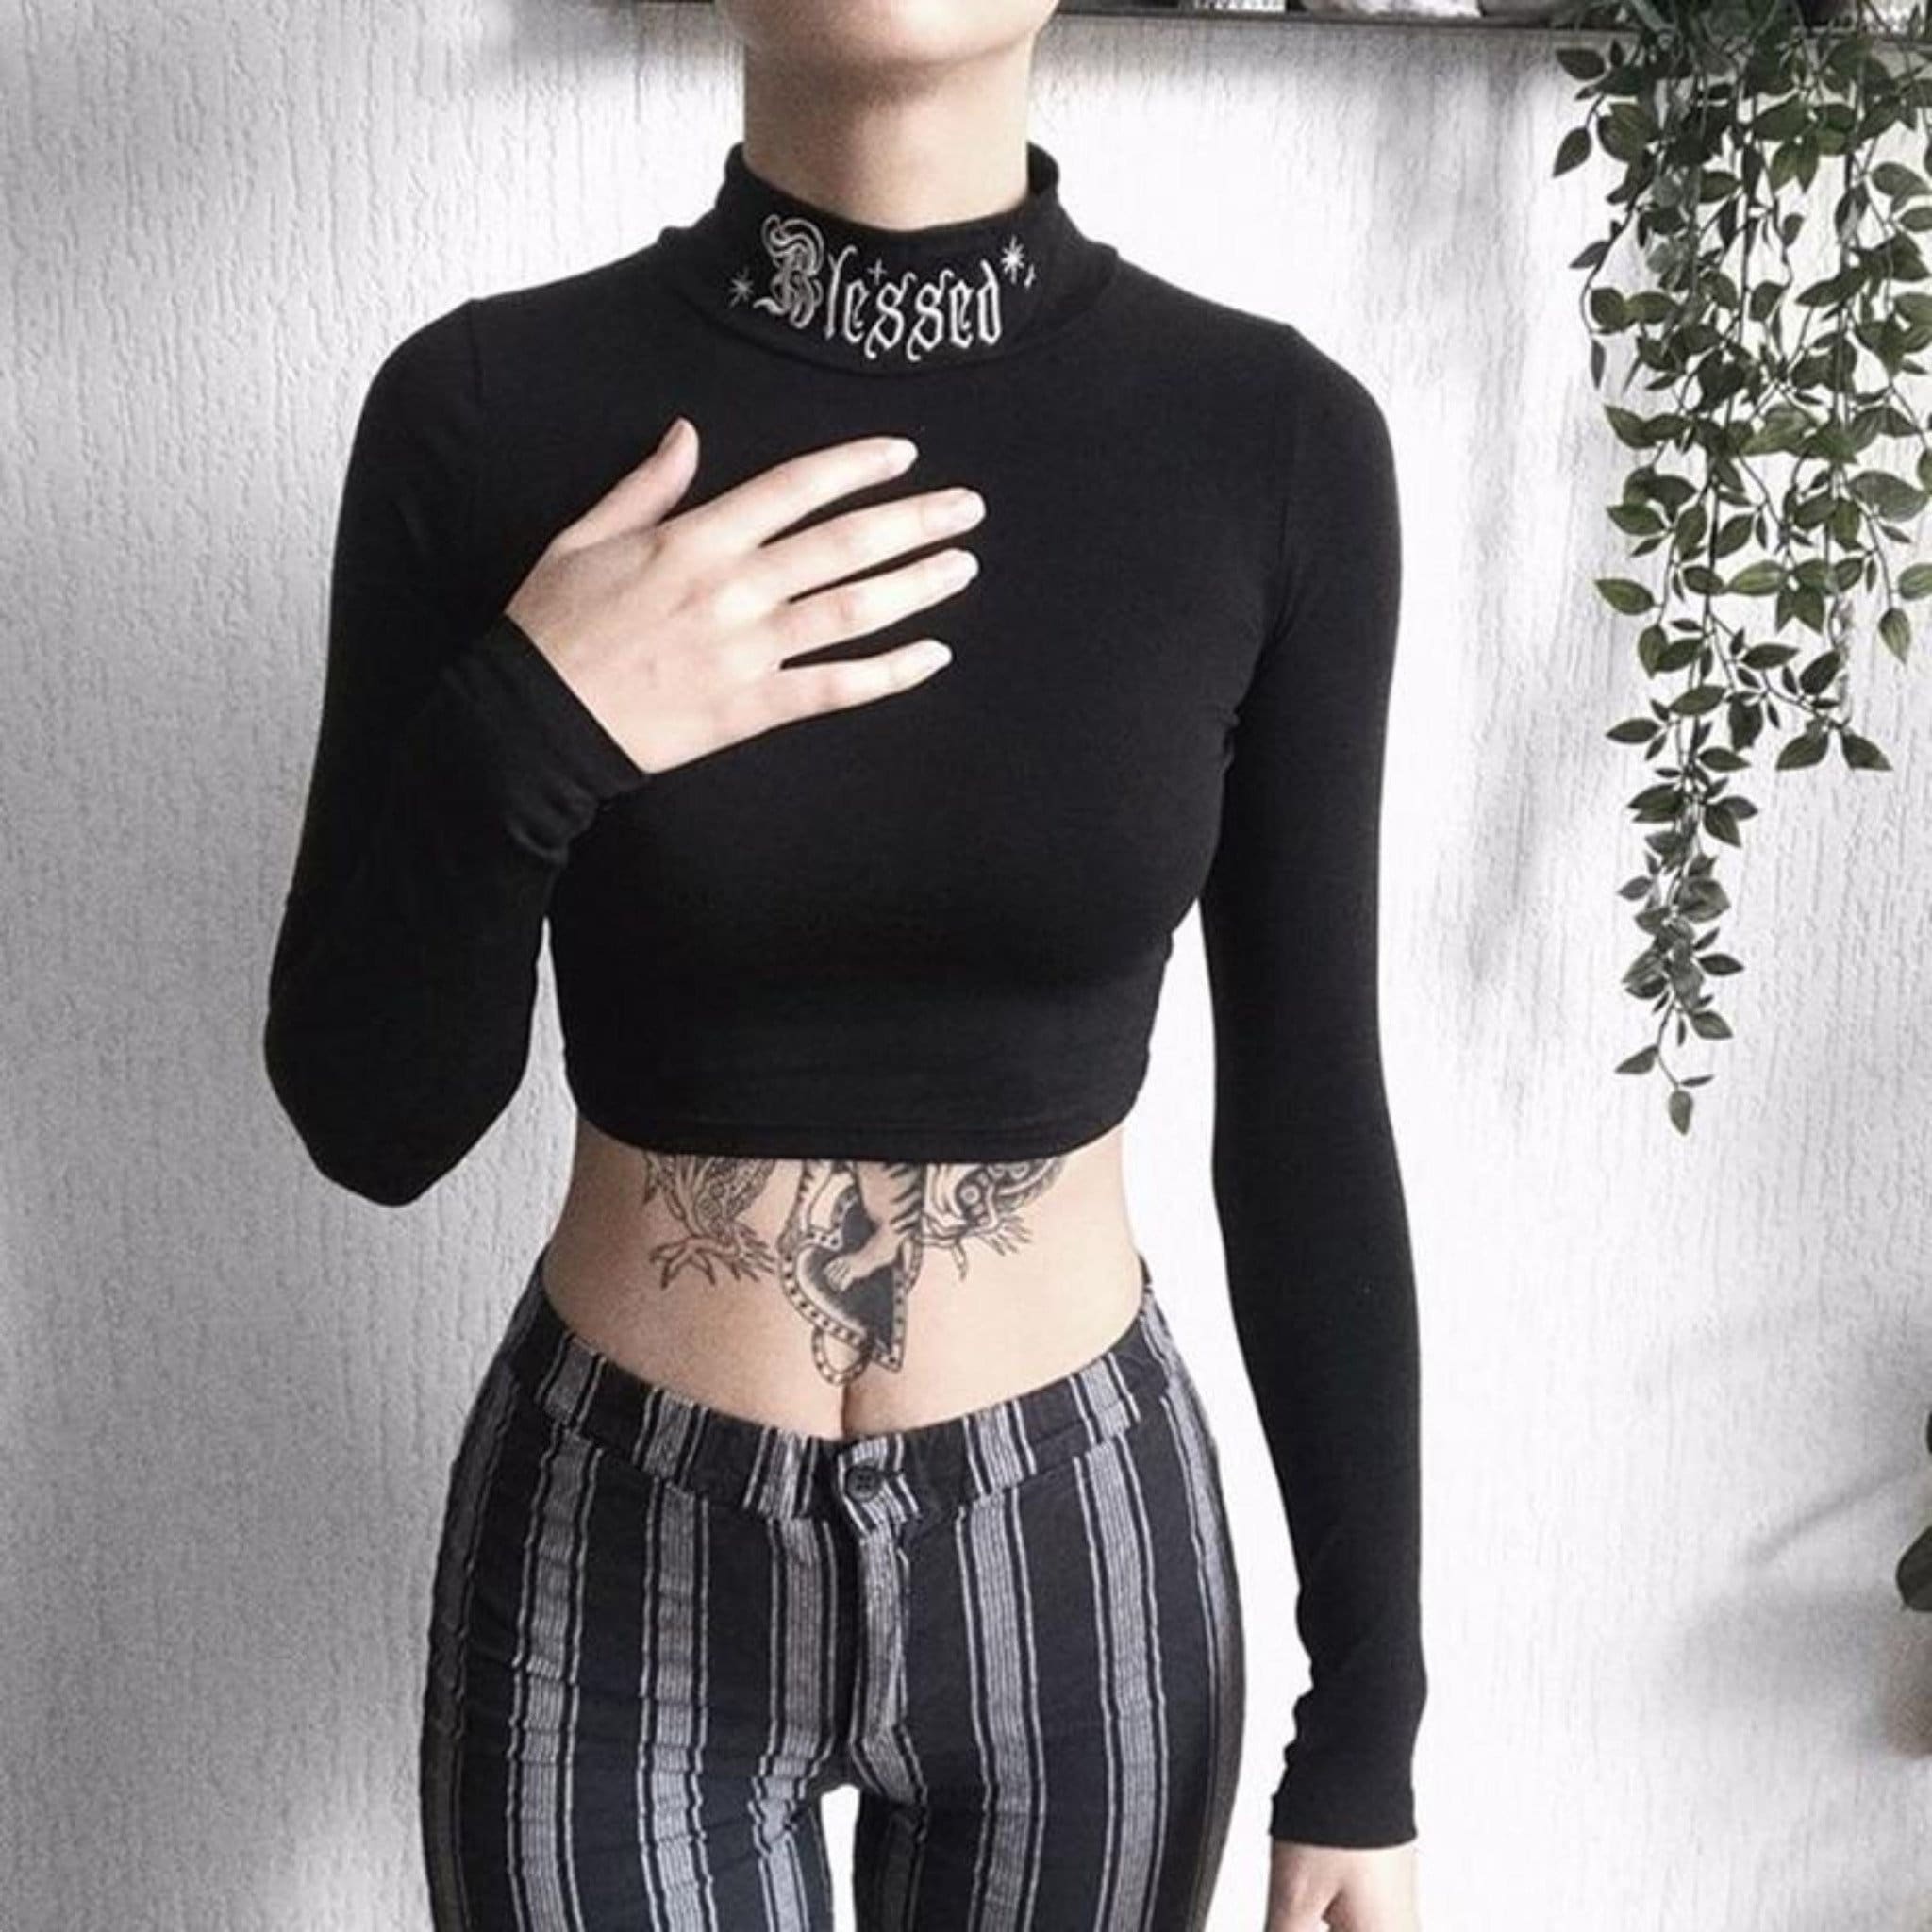 Blessed Gothic Mockneck Crop Top With Long Sleeve In Black